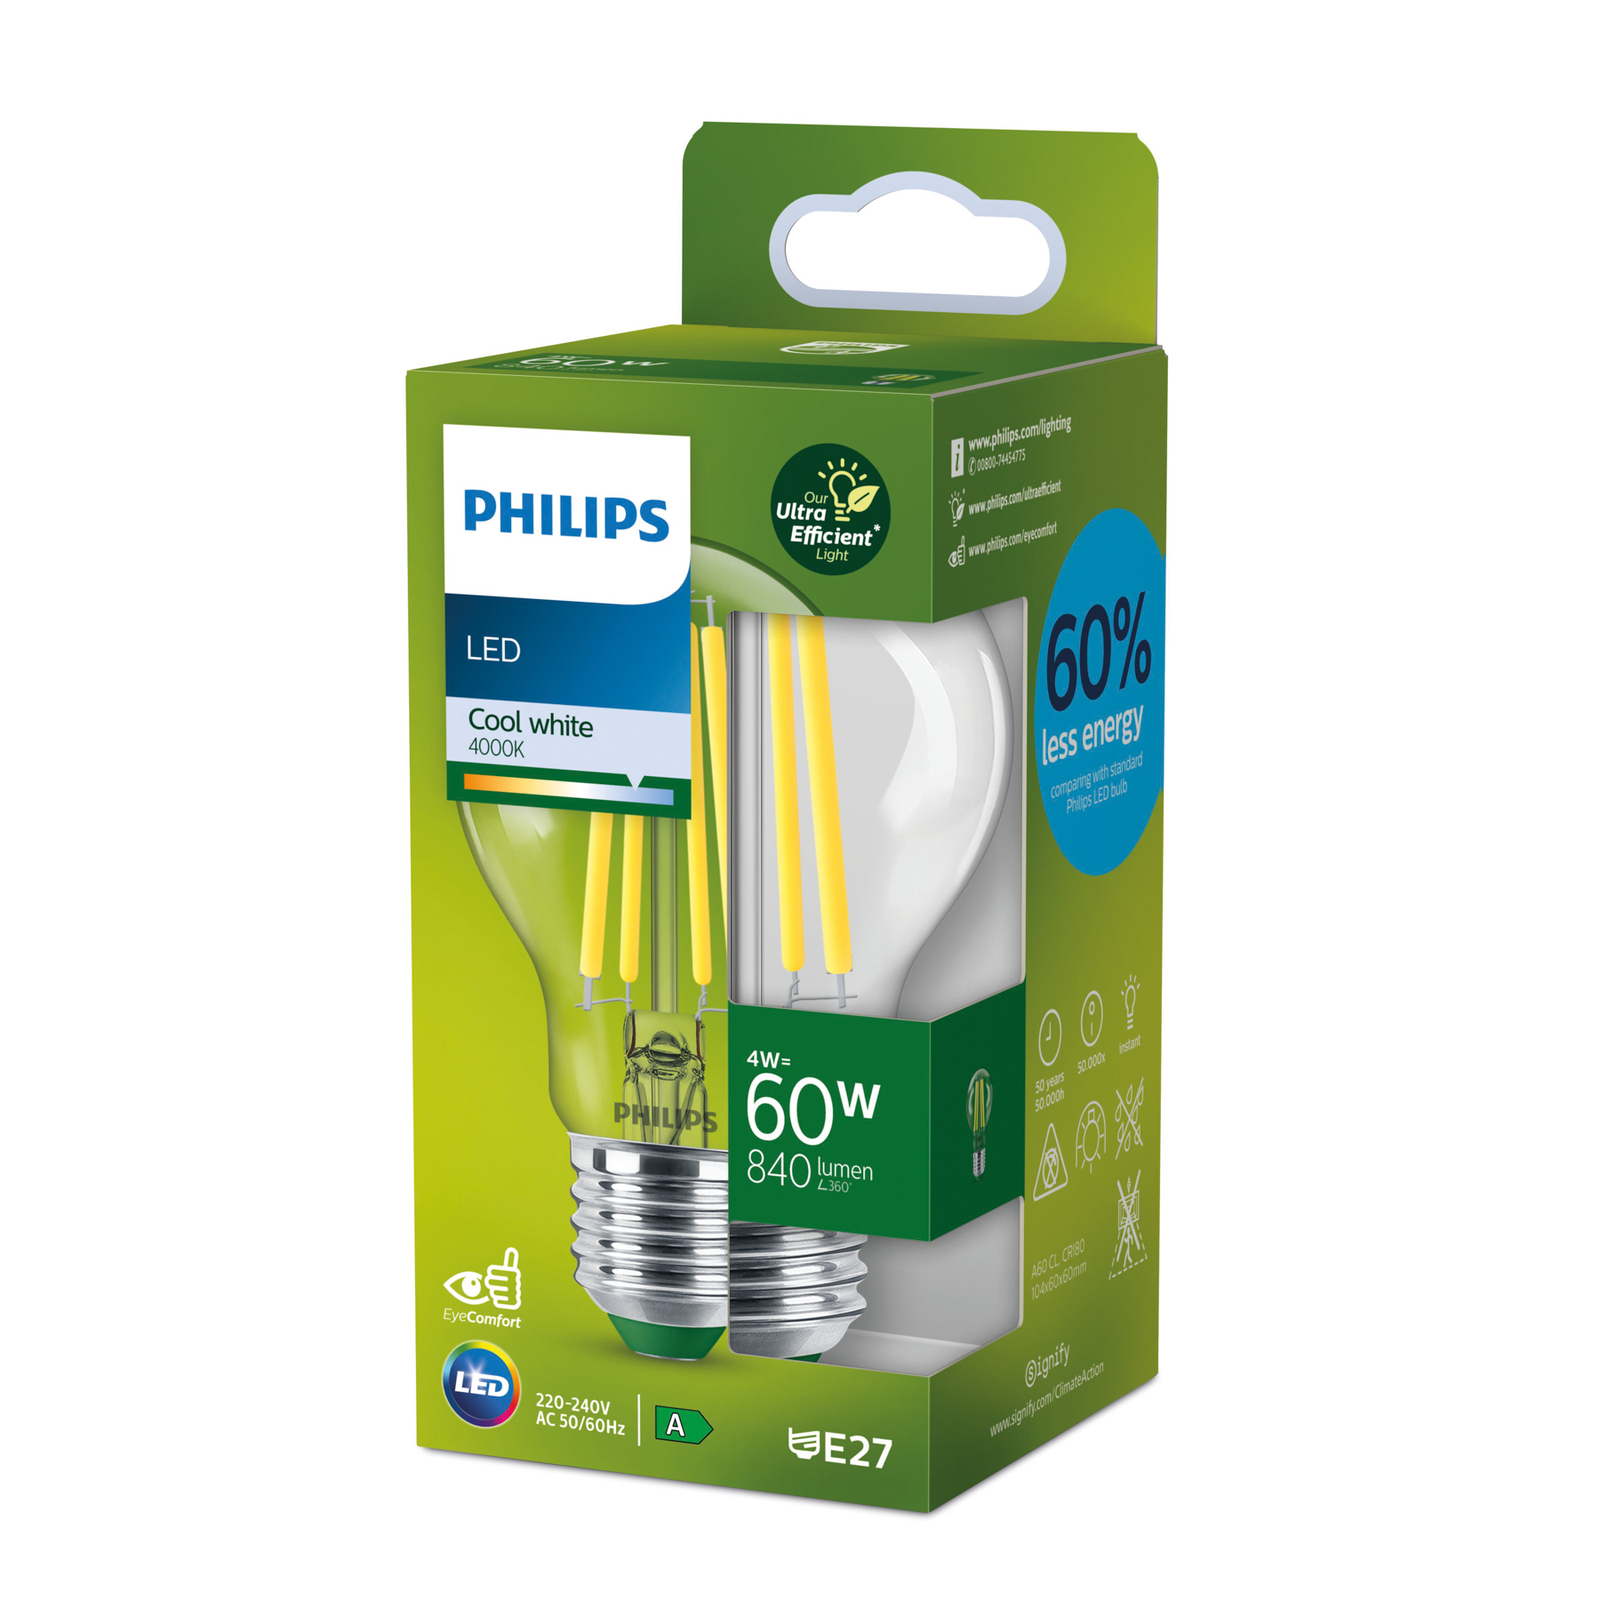 Philips E27 LED A60 4W 840lm 4 000K claire